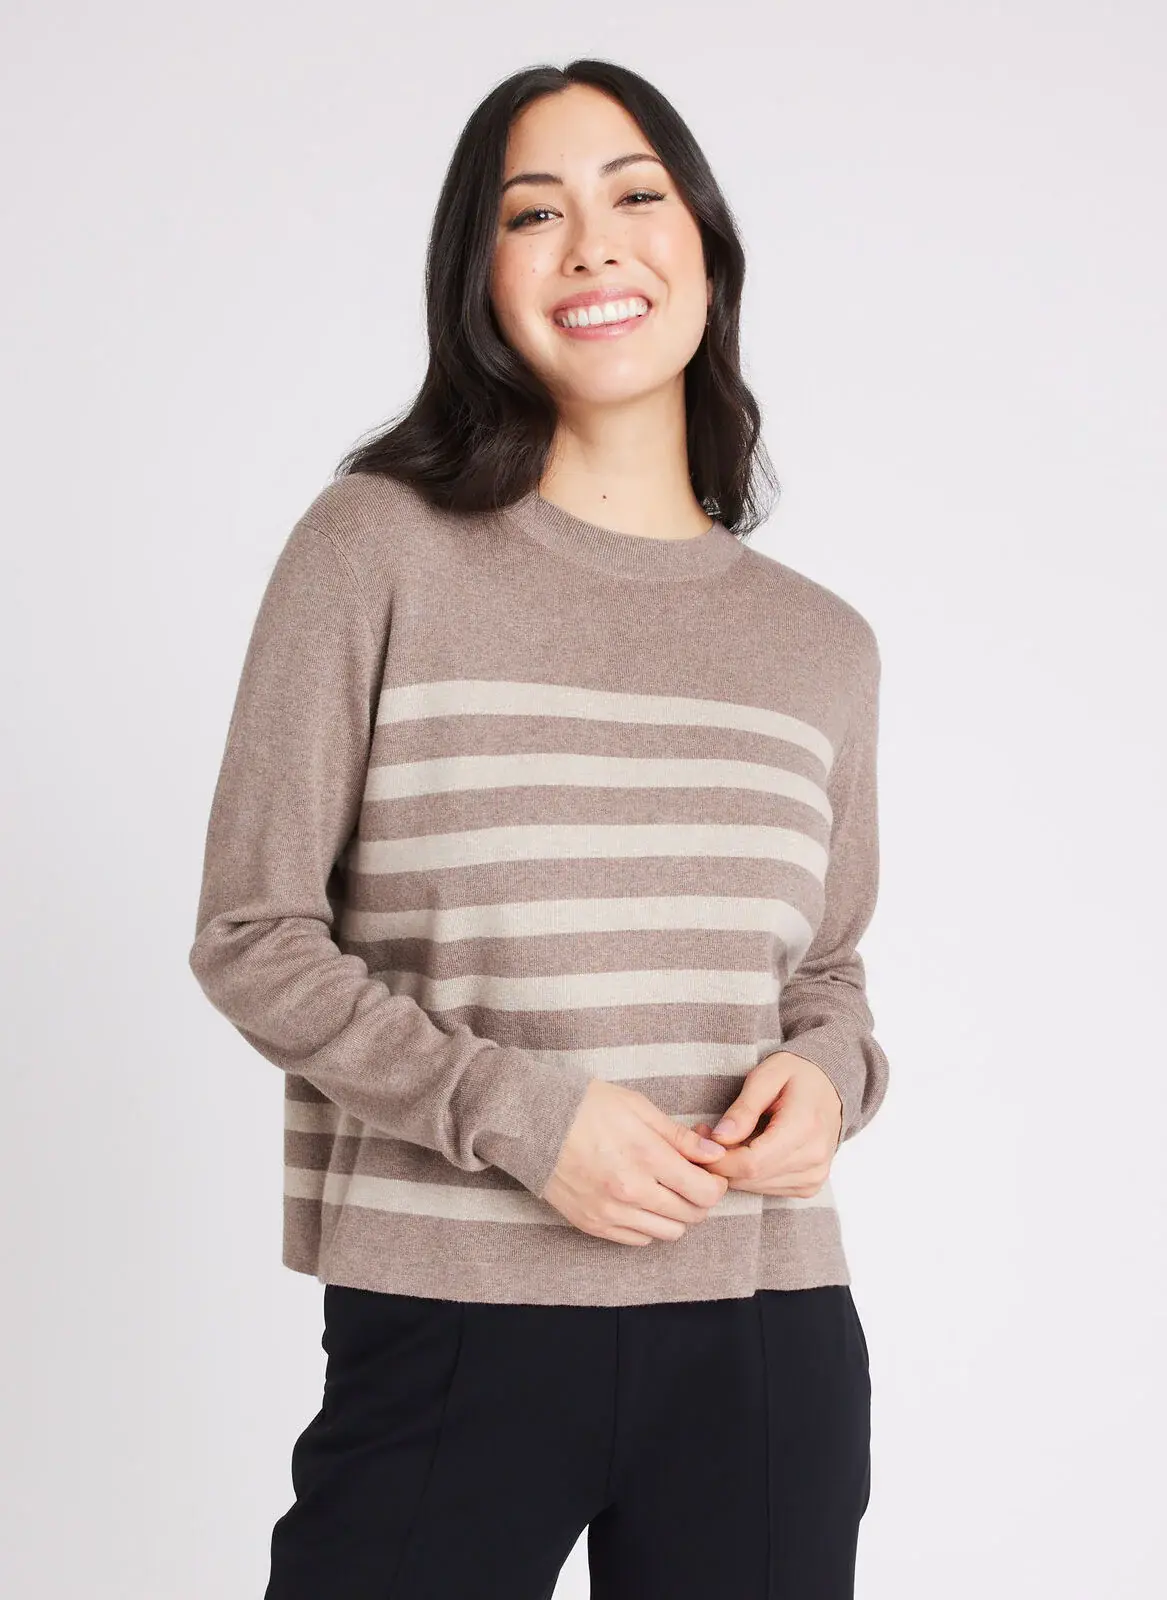 Kit And Ace Starling Striped Sweater. 1